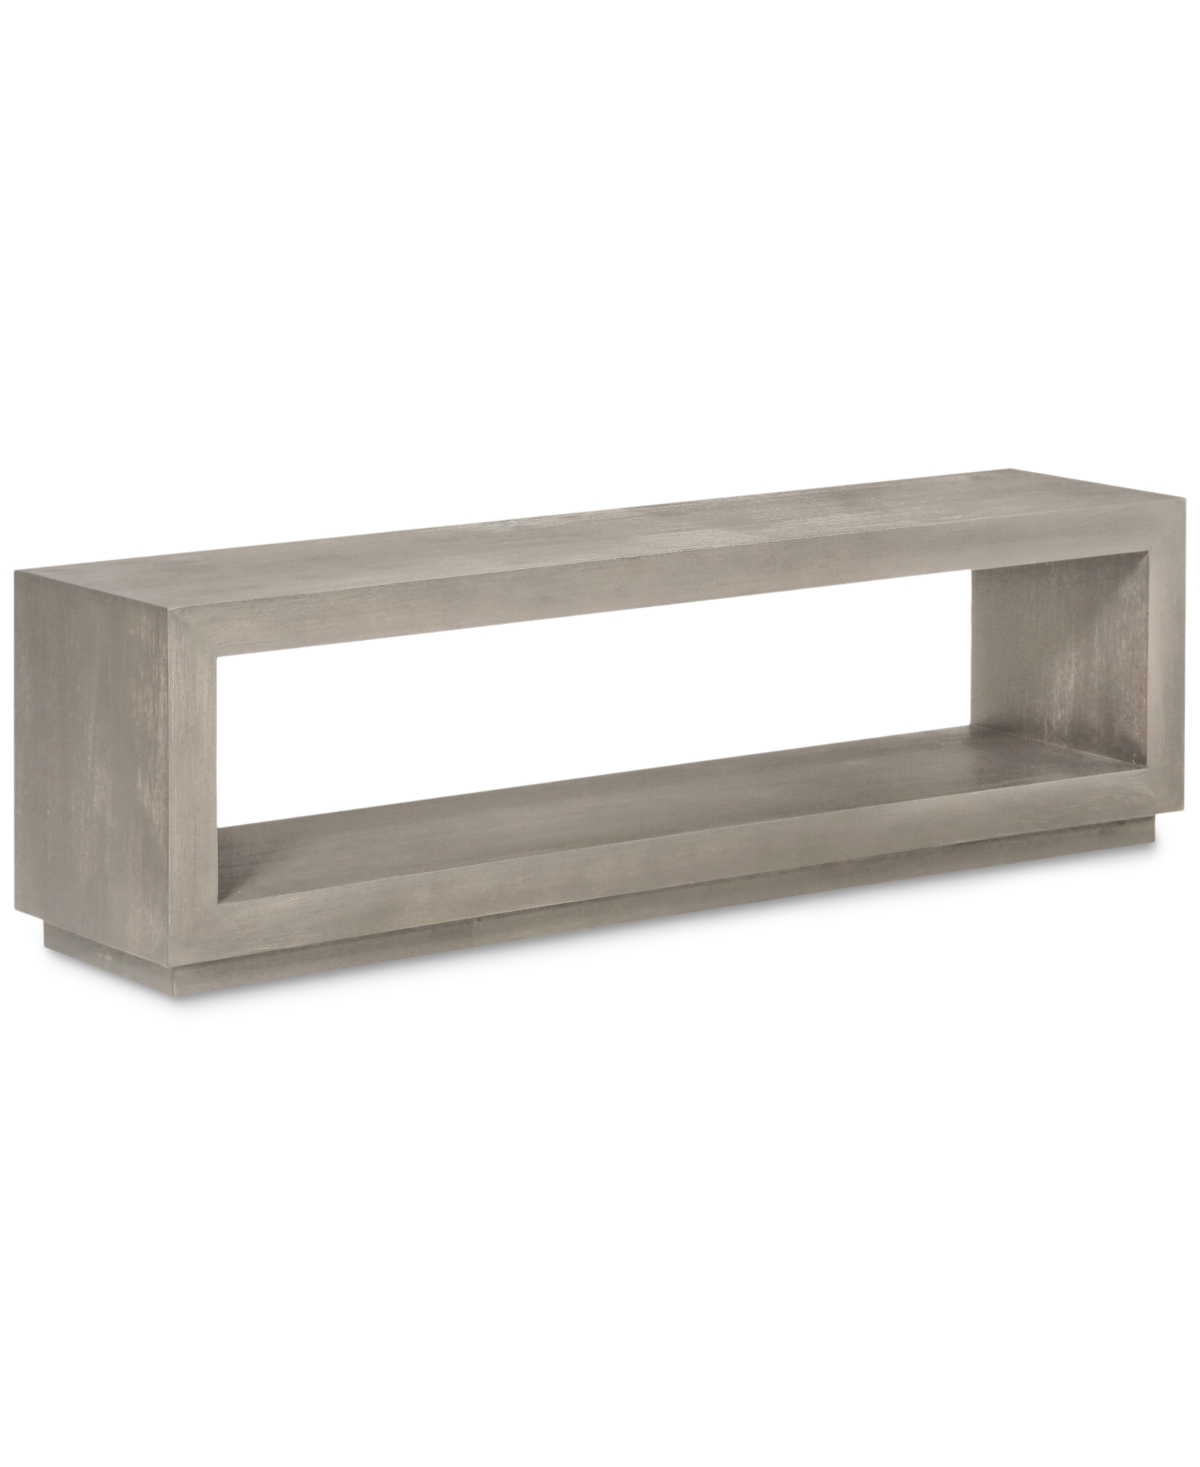 Furniture Tivie Dining Bench In Mineral Grey